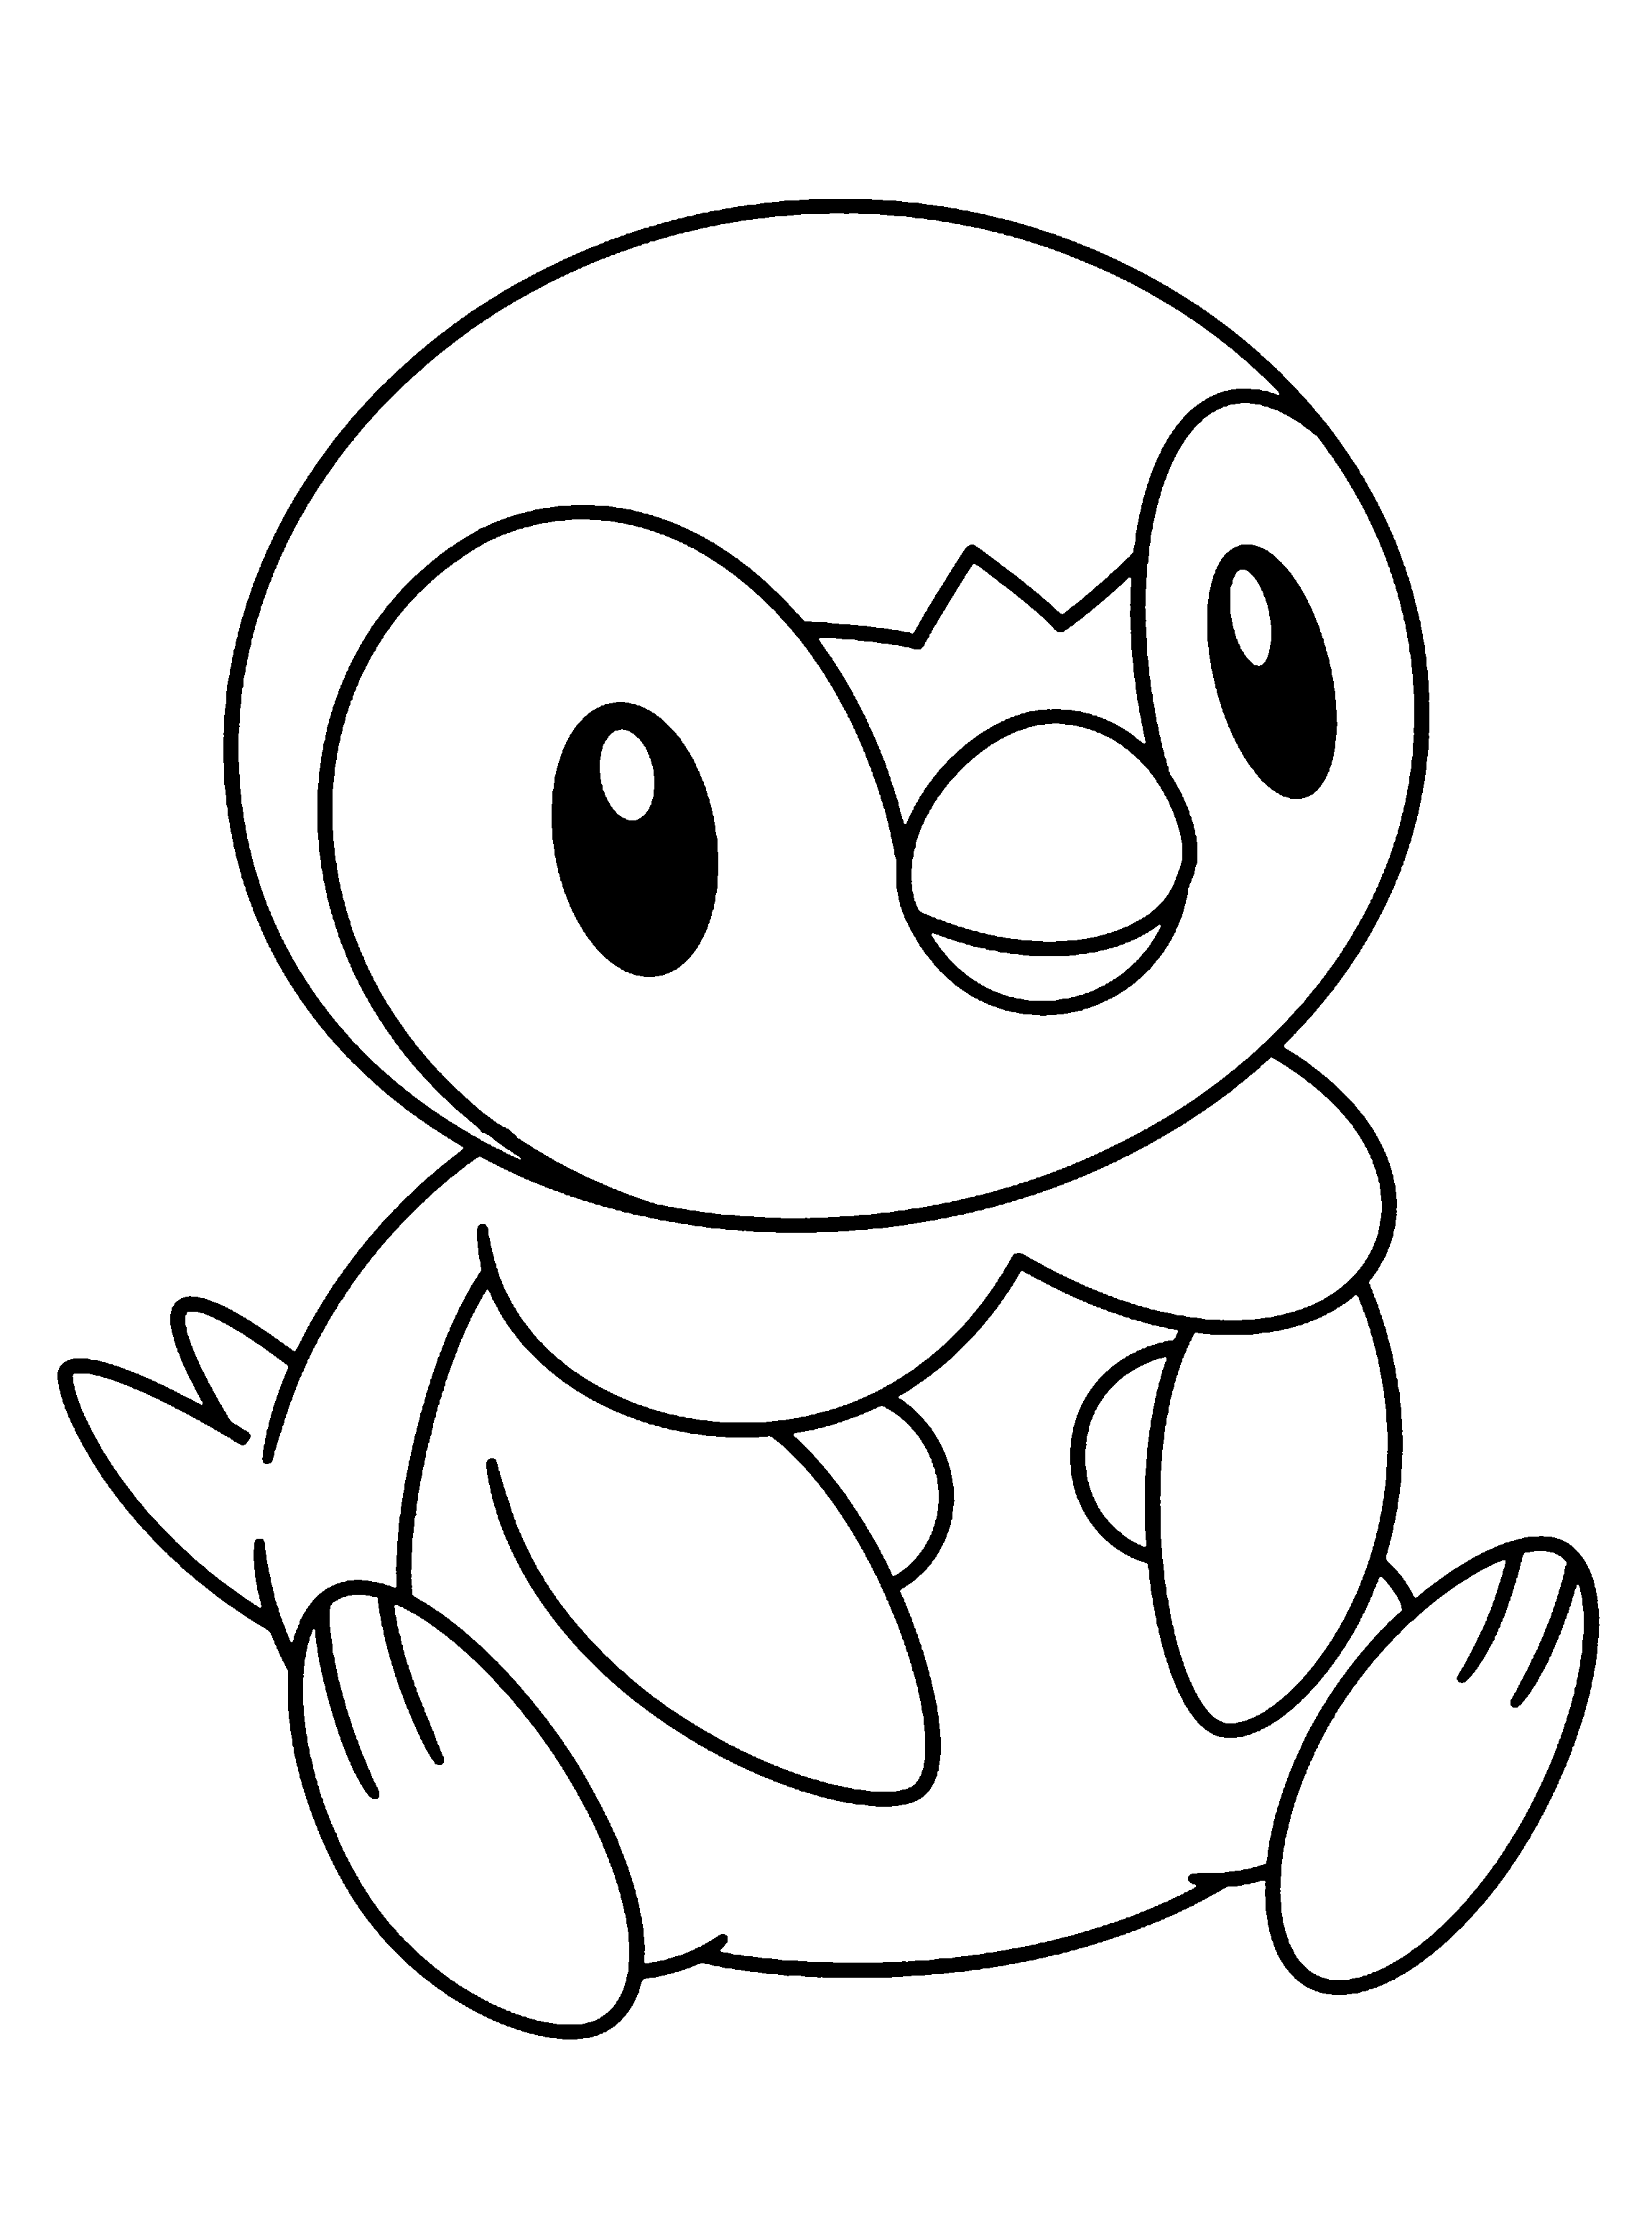 Piplup Pokemon coloring page